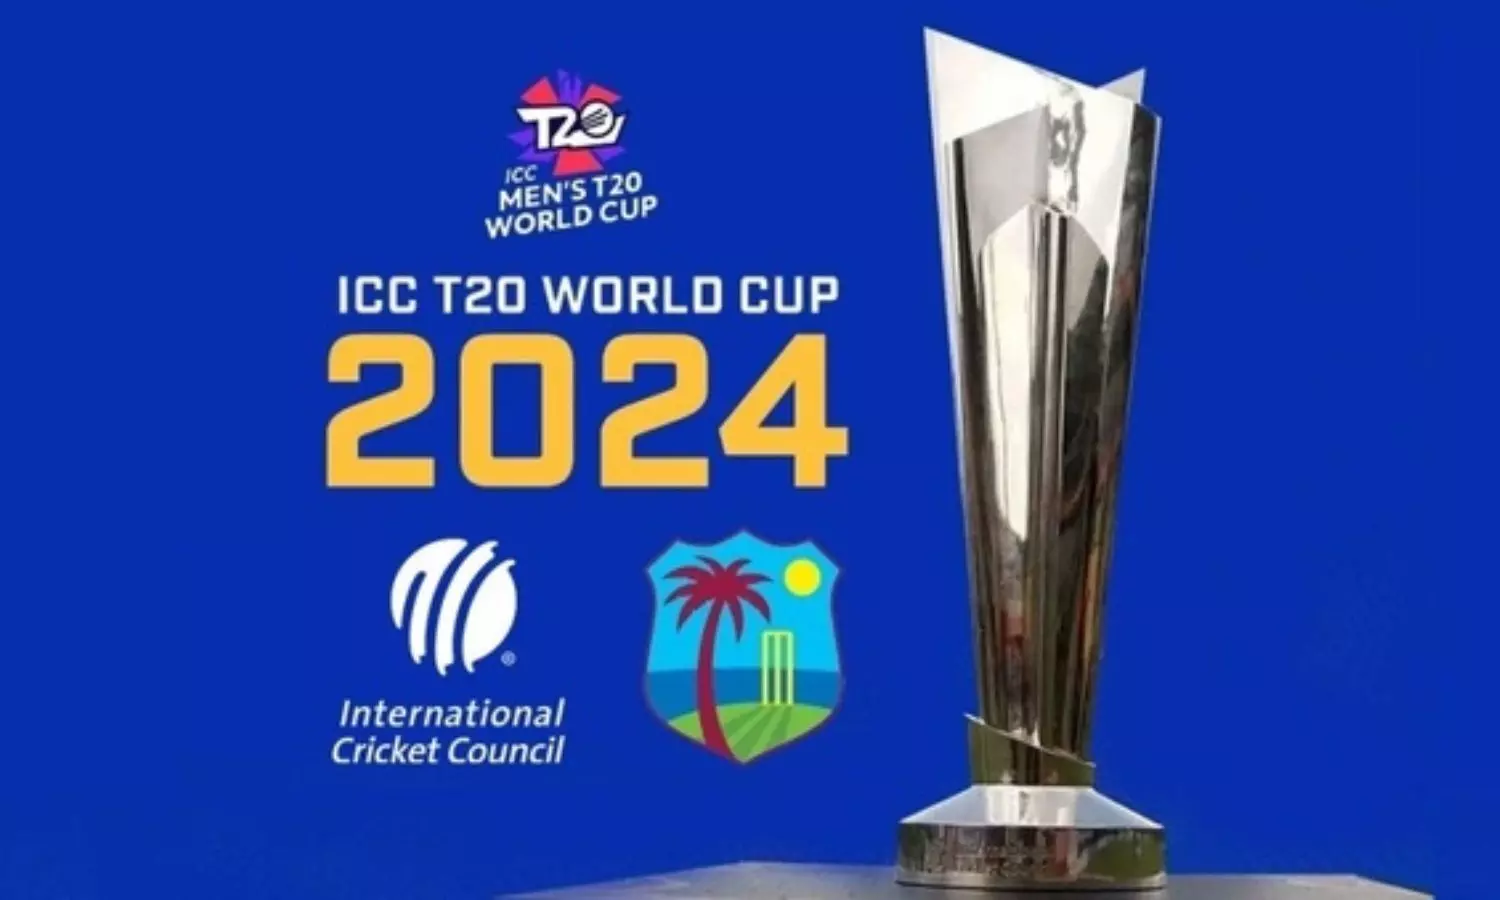 ICC T20 World Cup 2024: If qualified, India scheduled to play semifinal and final in less than 48 hours